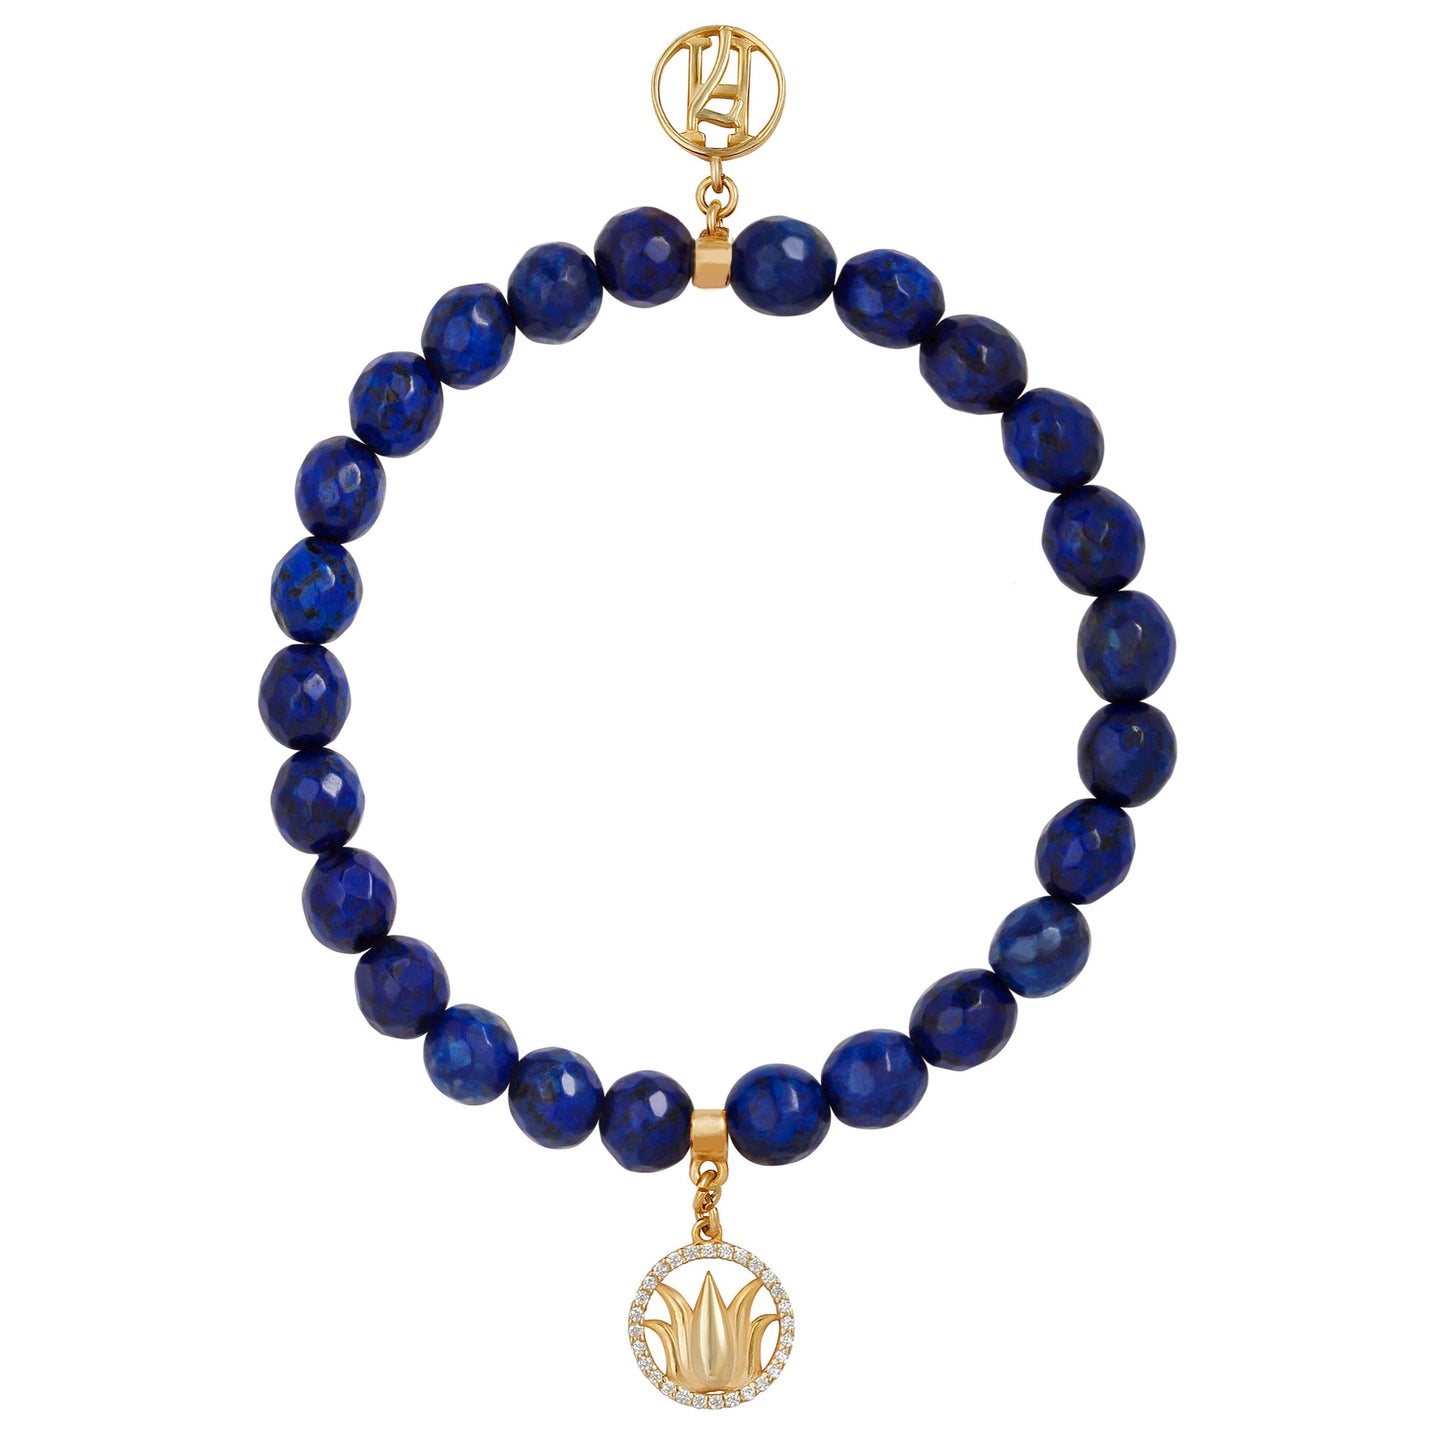 The Third eye Chakra 925 Sterling Silver 18kt Gold Plated Lotus Diamante Bracelet